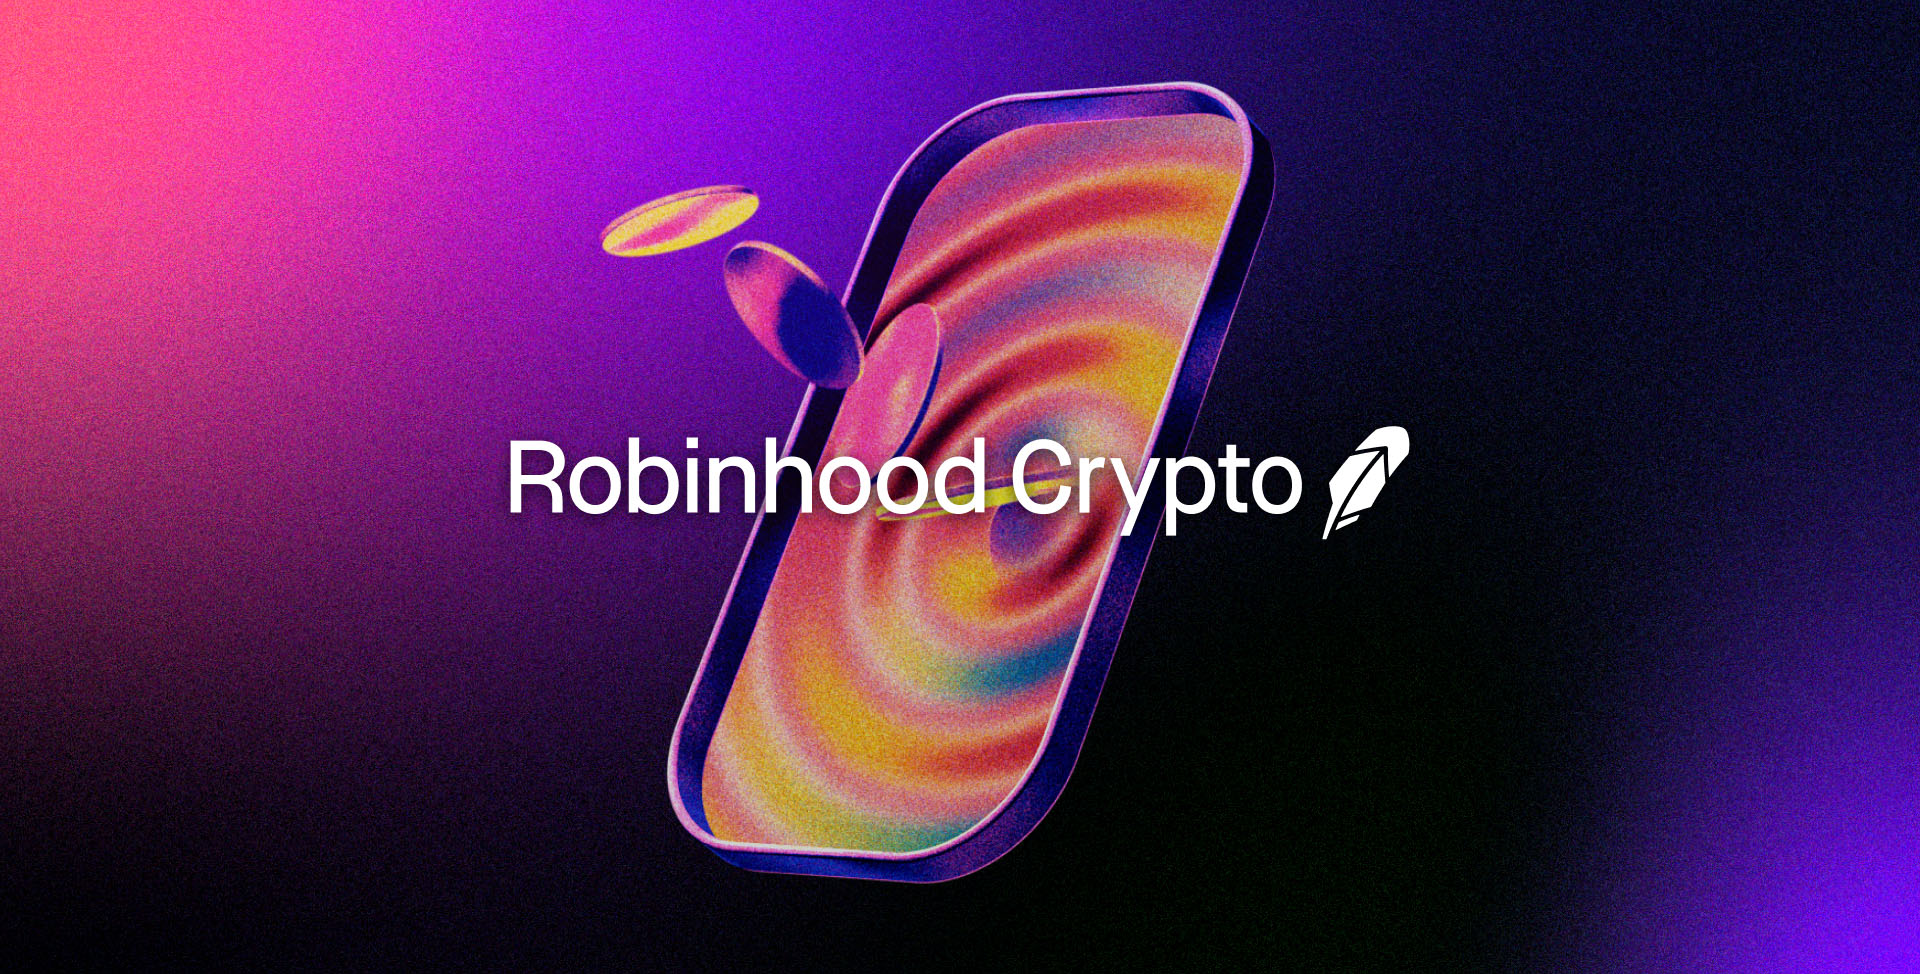 Robinhood Crypto Launches Staking in Europe with Localized Apps to Follow